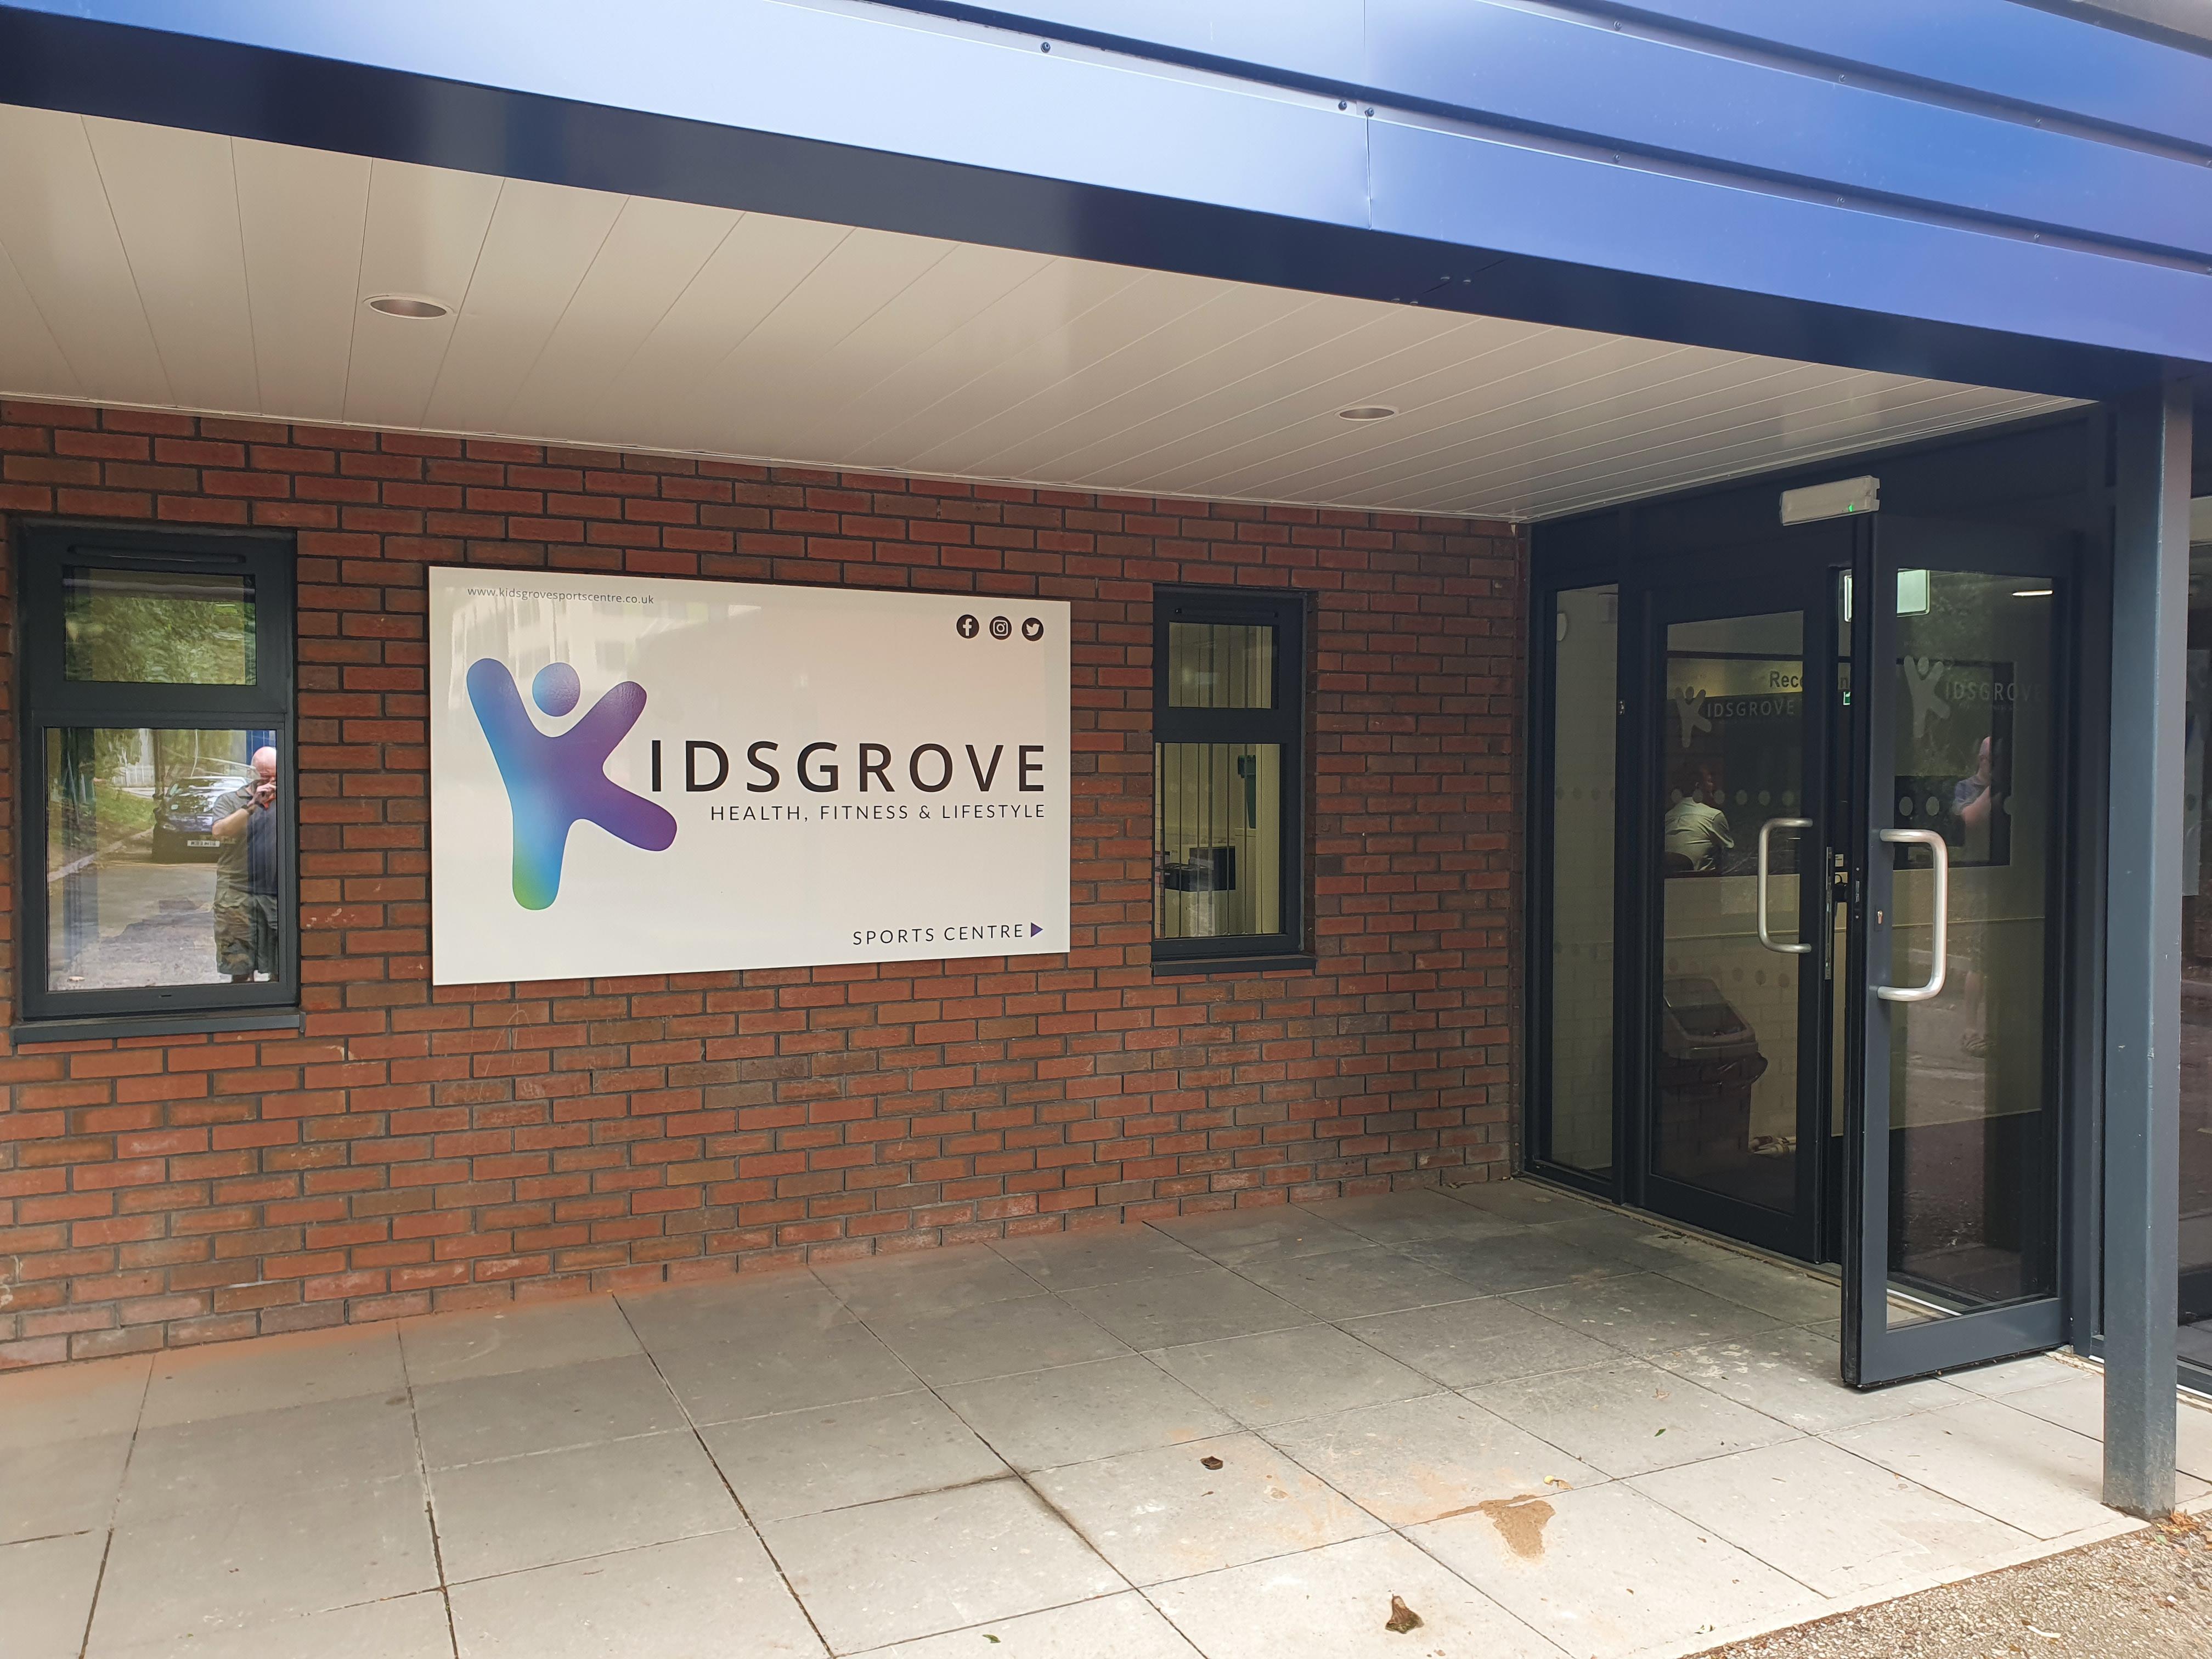 Kidsgrove Sports Centre, Kidsgrove Sports Centre Community Group, refurbishment, investment, Town Deal